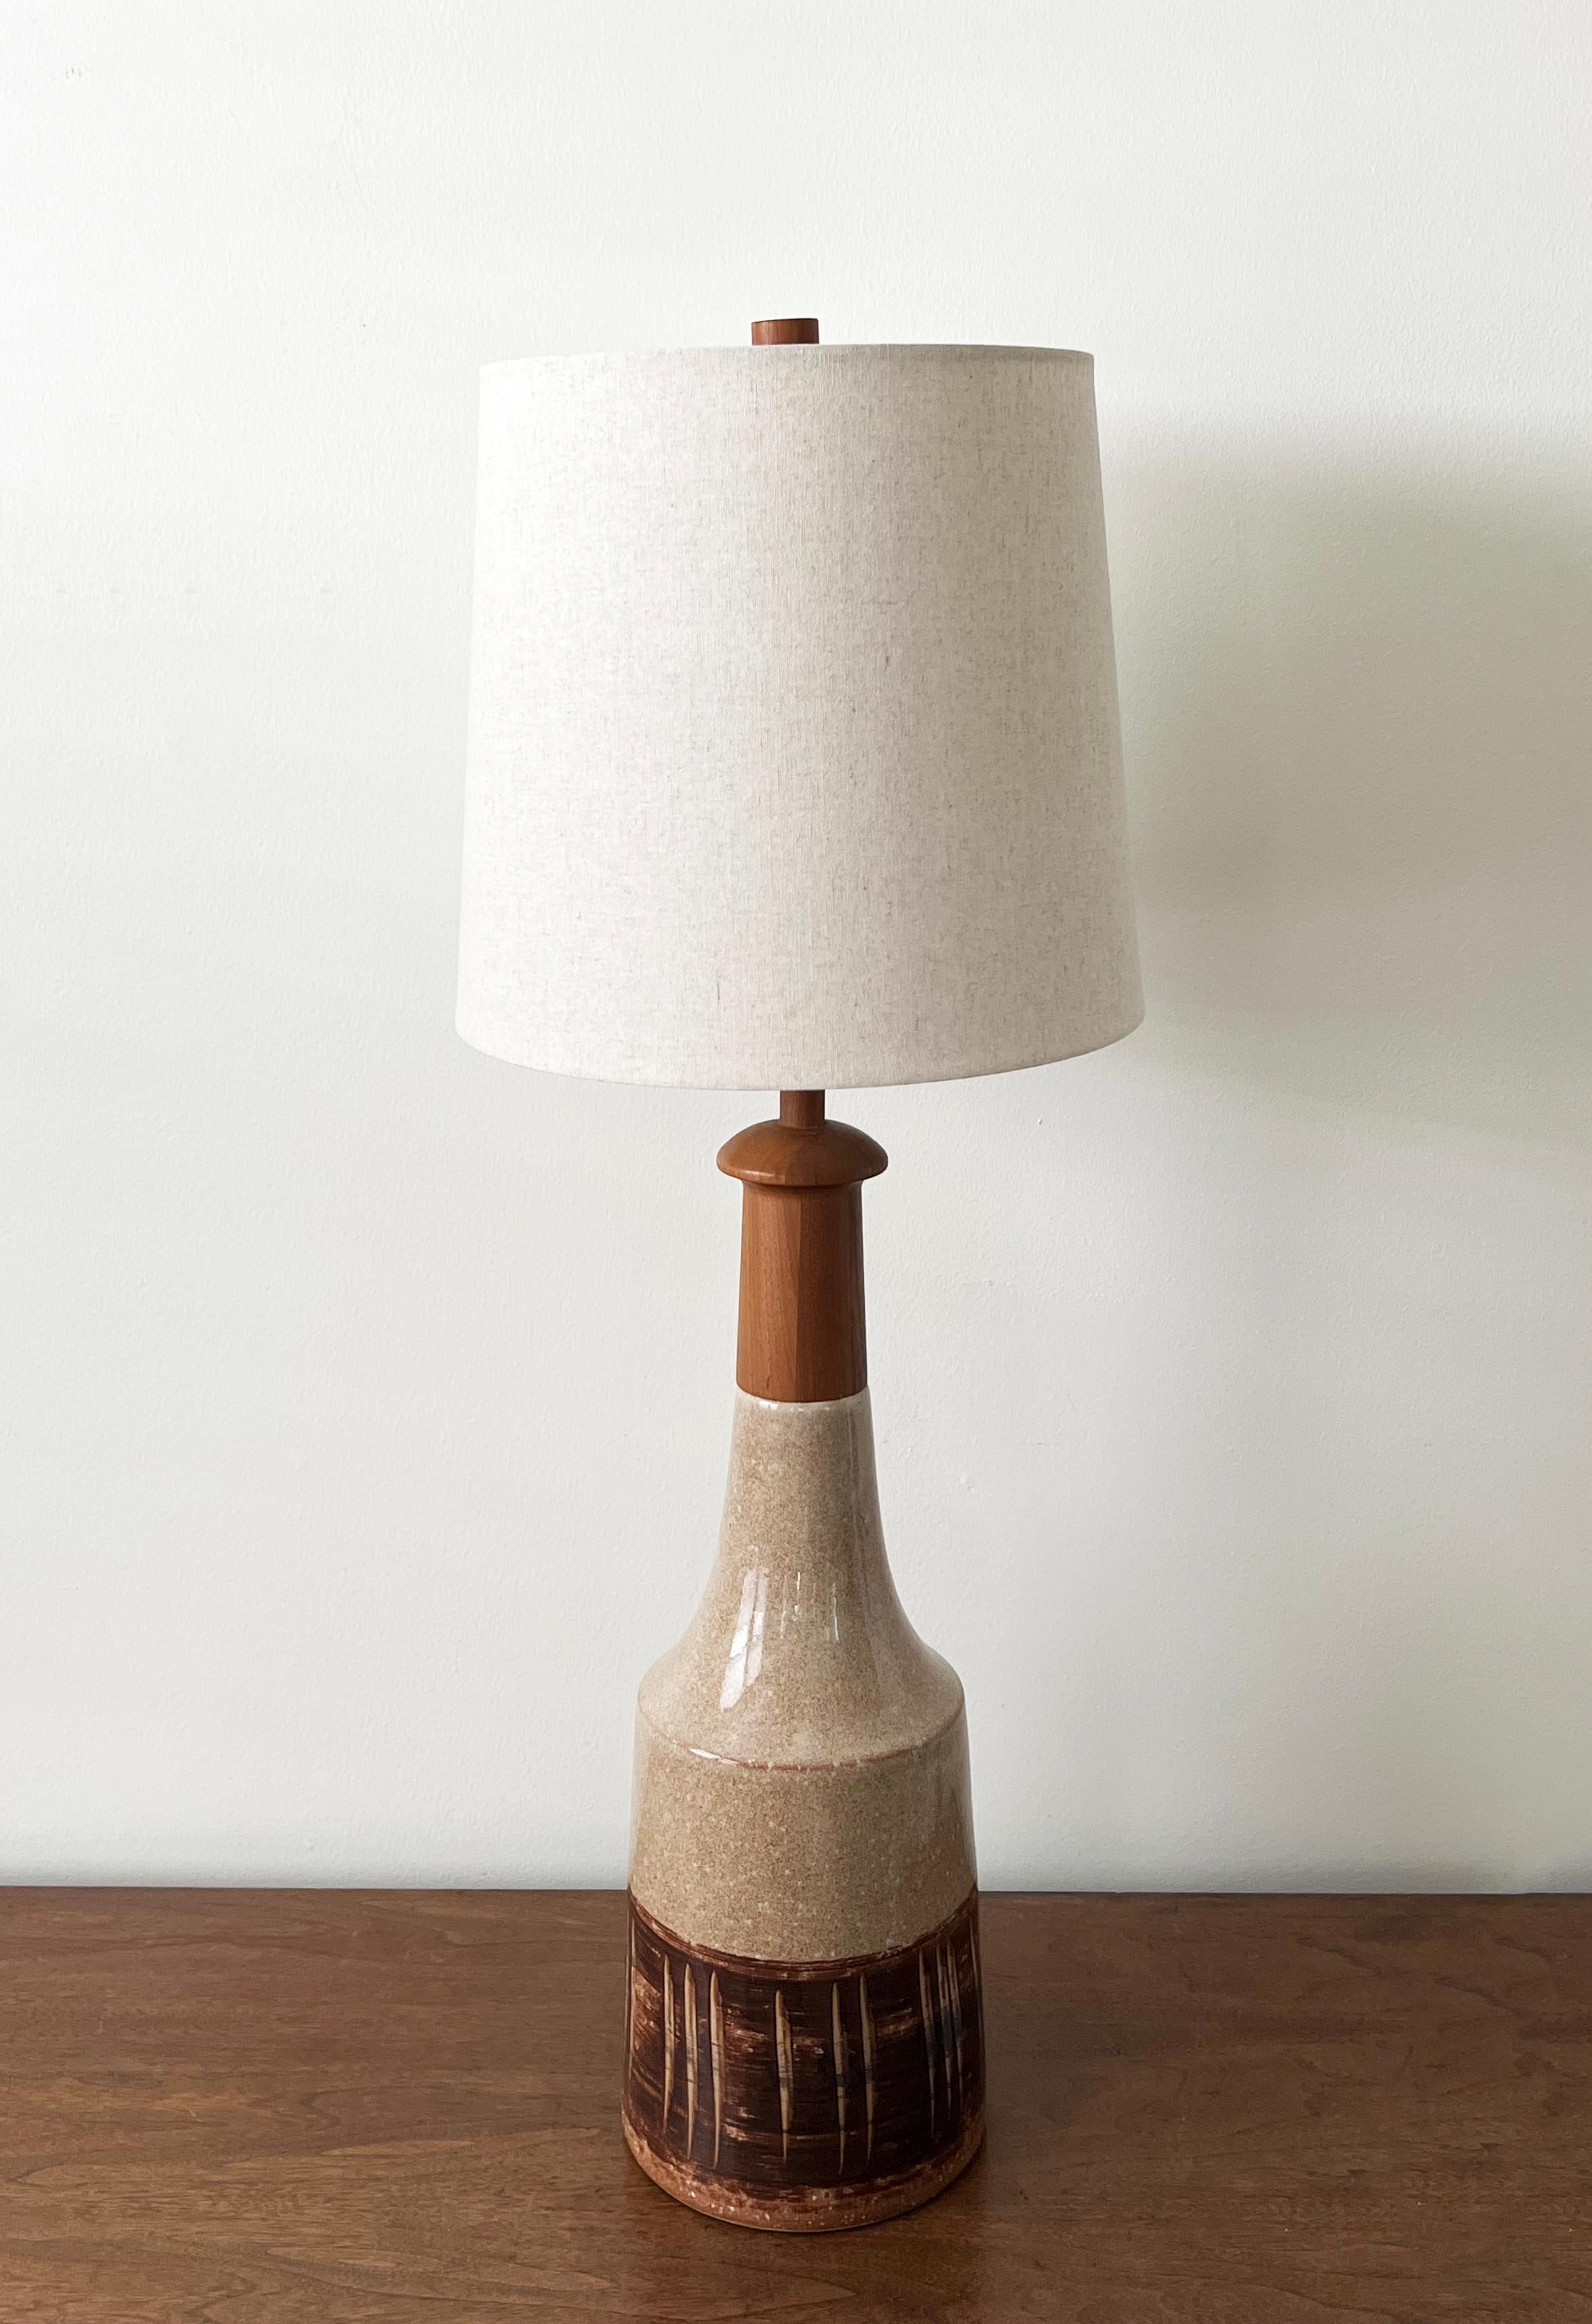 Large table lamp by famed ceramicist duo Jane and Gordon Martz, for Marshall Studios, 1960s. This lamp has interesting incised detailing with a modern earthtone pallete consisting of tans, browns, and whites. The walnut neck and finial are both in